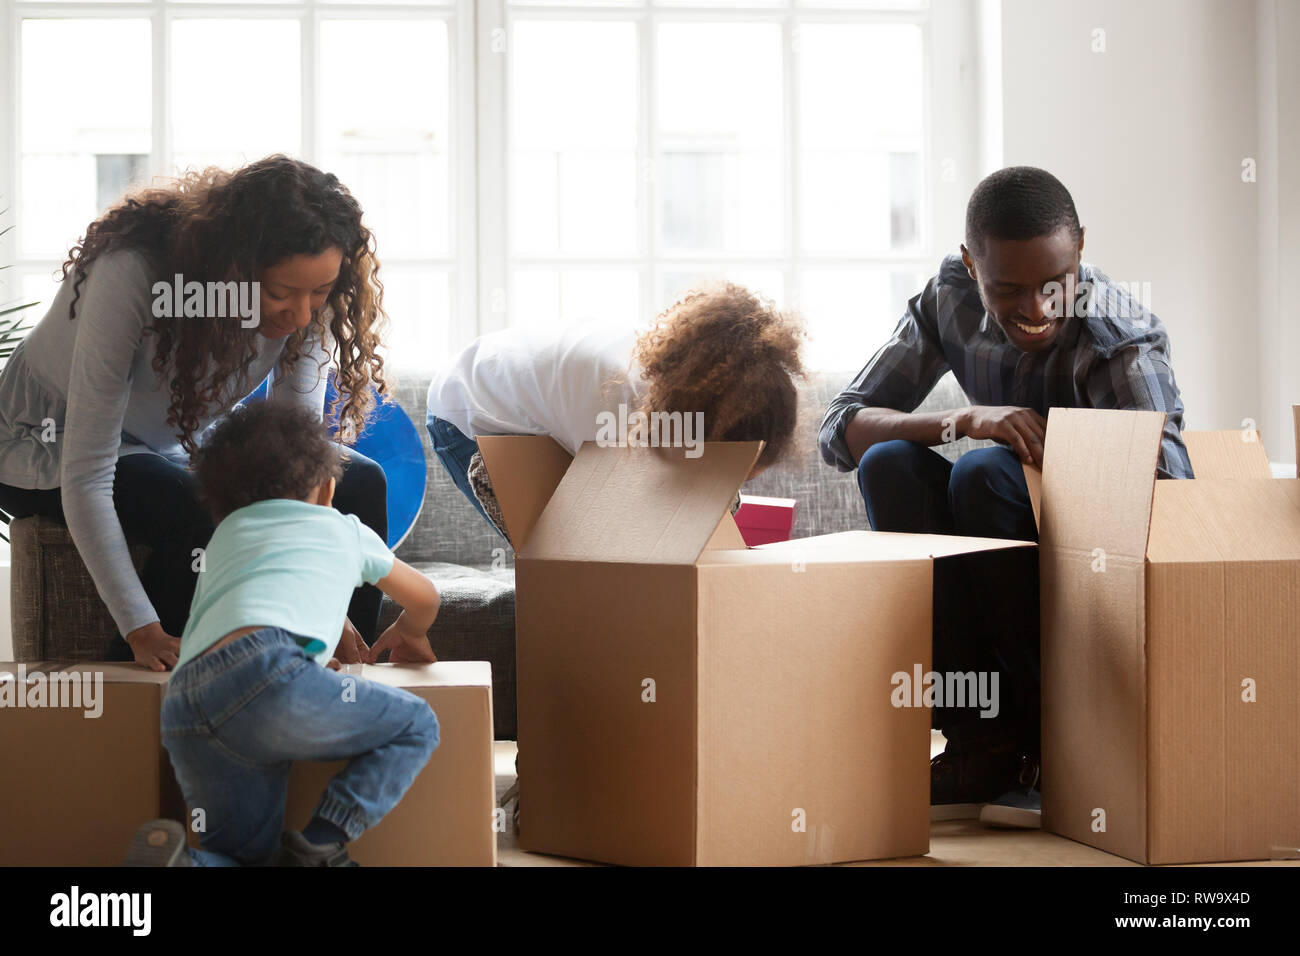 Happy black family with small kids unpack boxes Stock Photo